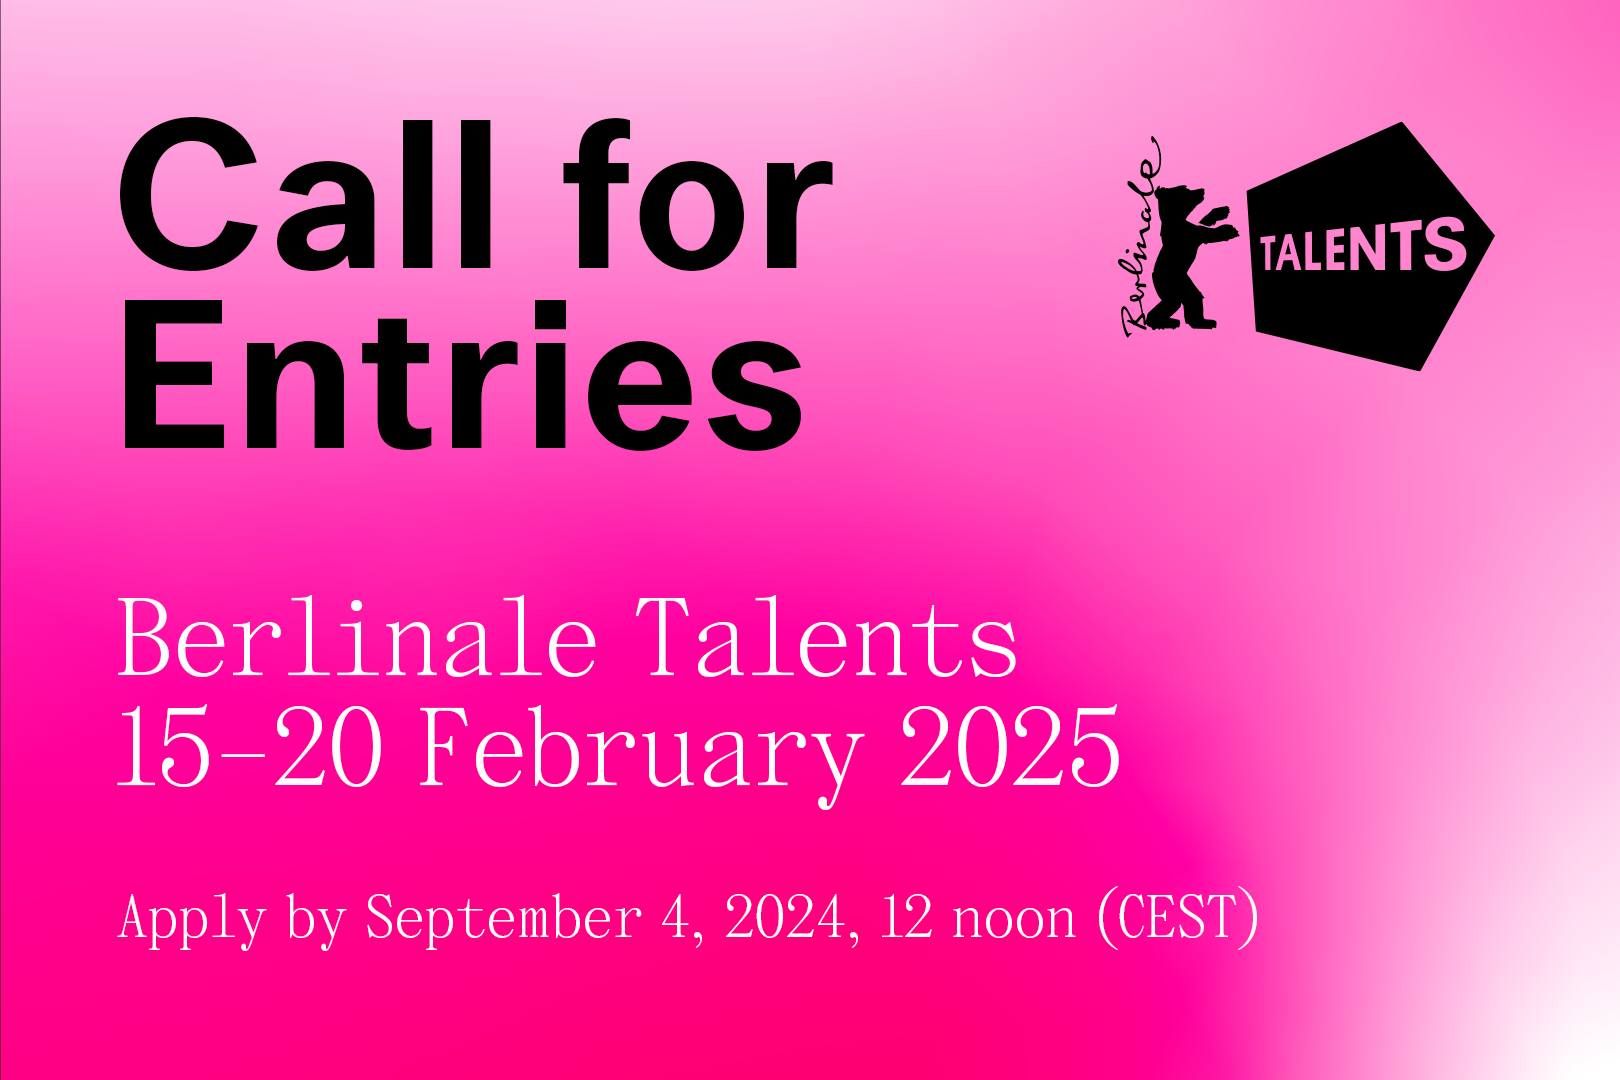 Berlinale Talents Call for Entries